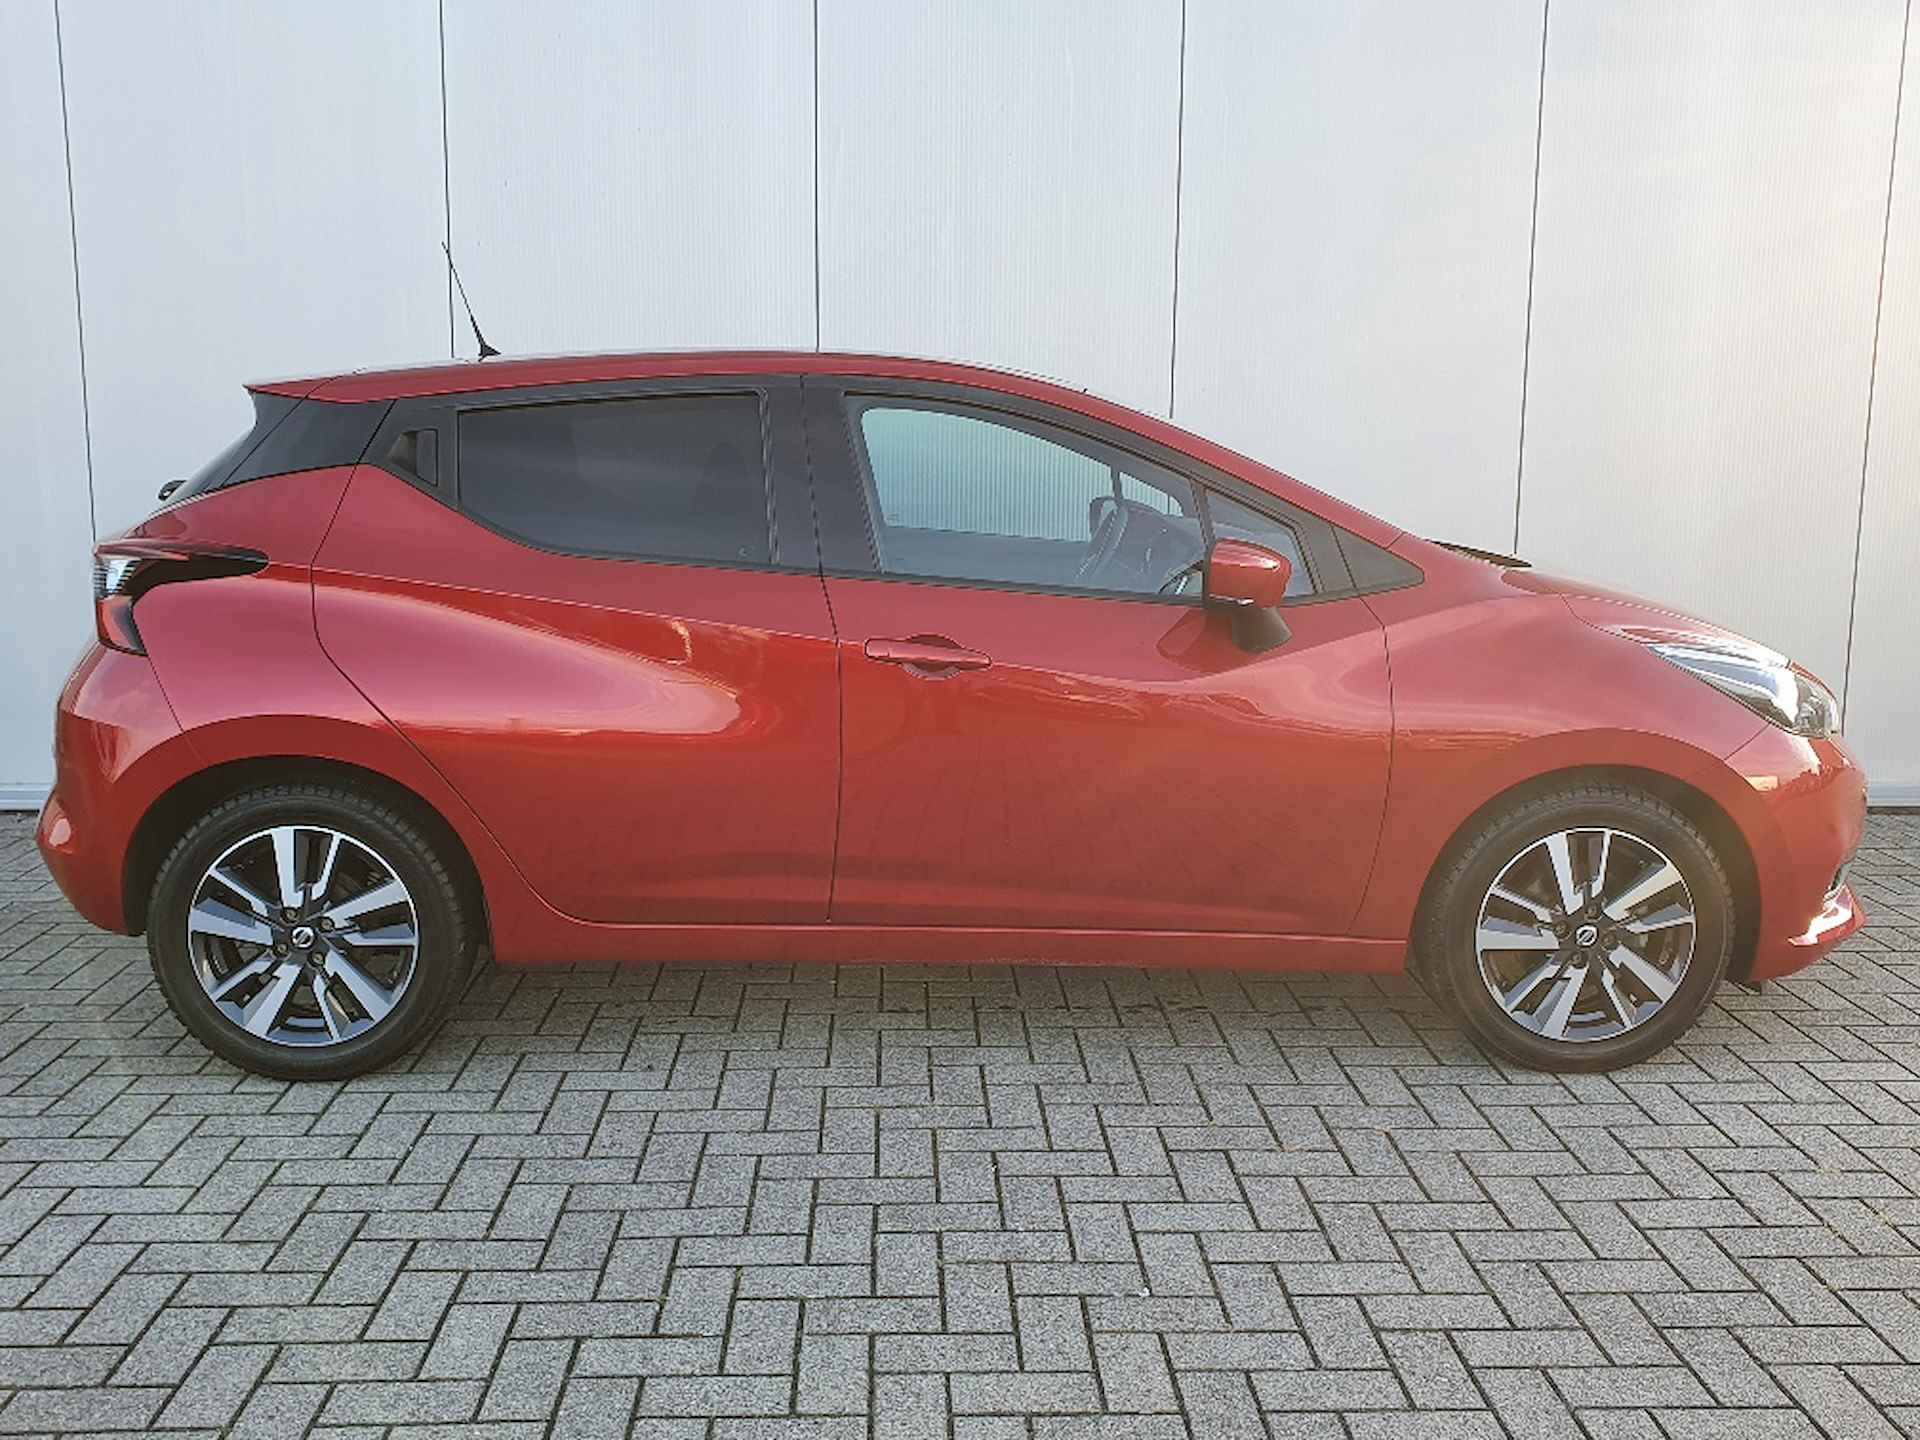 Nissan Micra 1.0 IG-T N-Connecta Navigatie, Climate Control, Cruise Control, 16"Lm, Achteruitrijcamera - 3/20